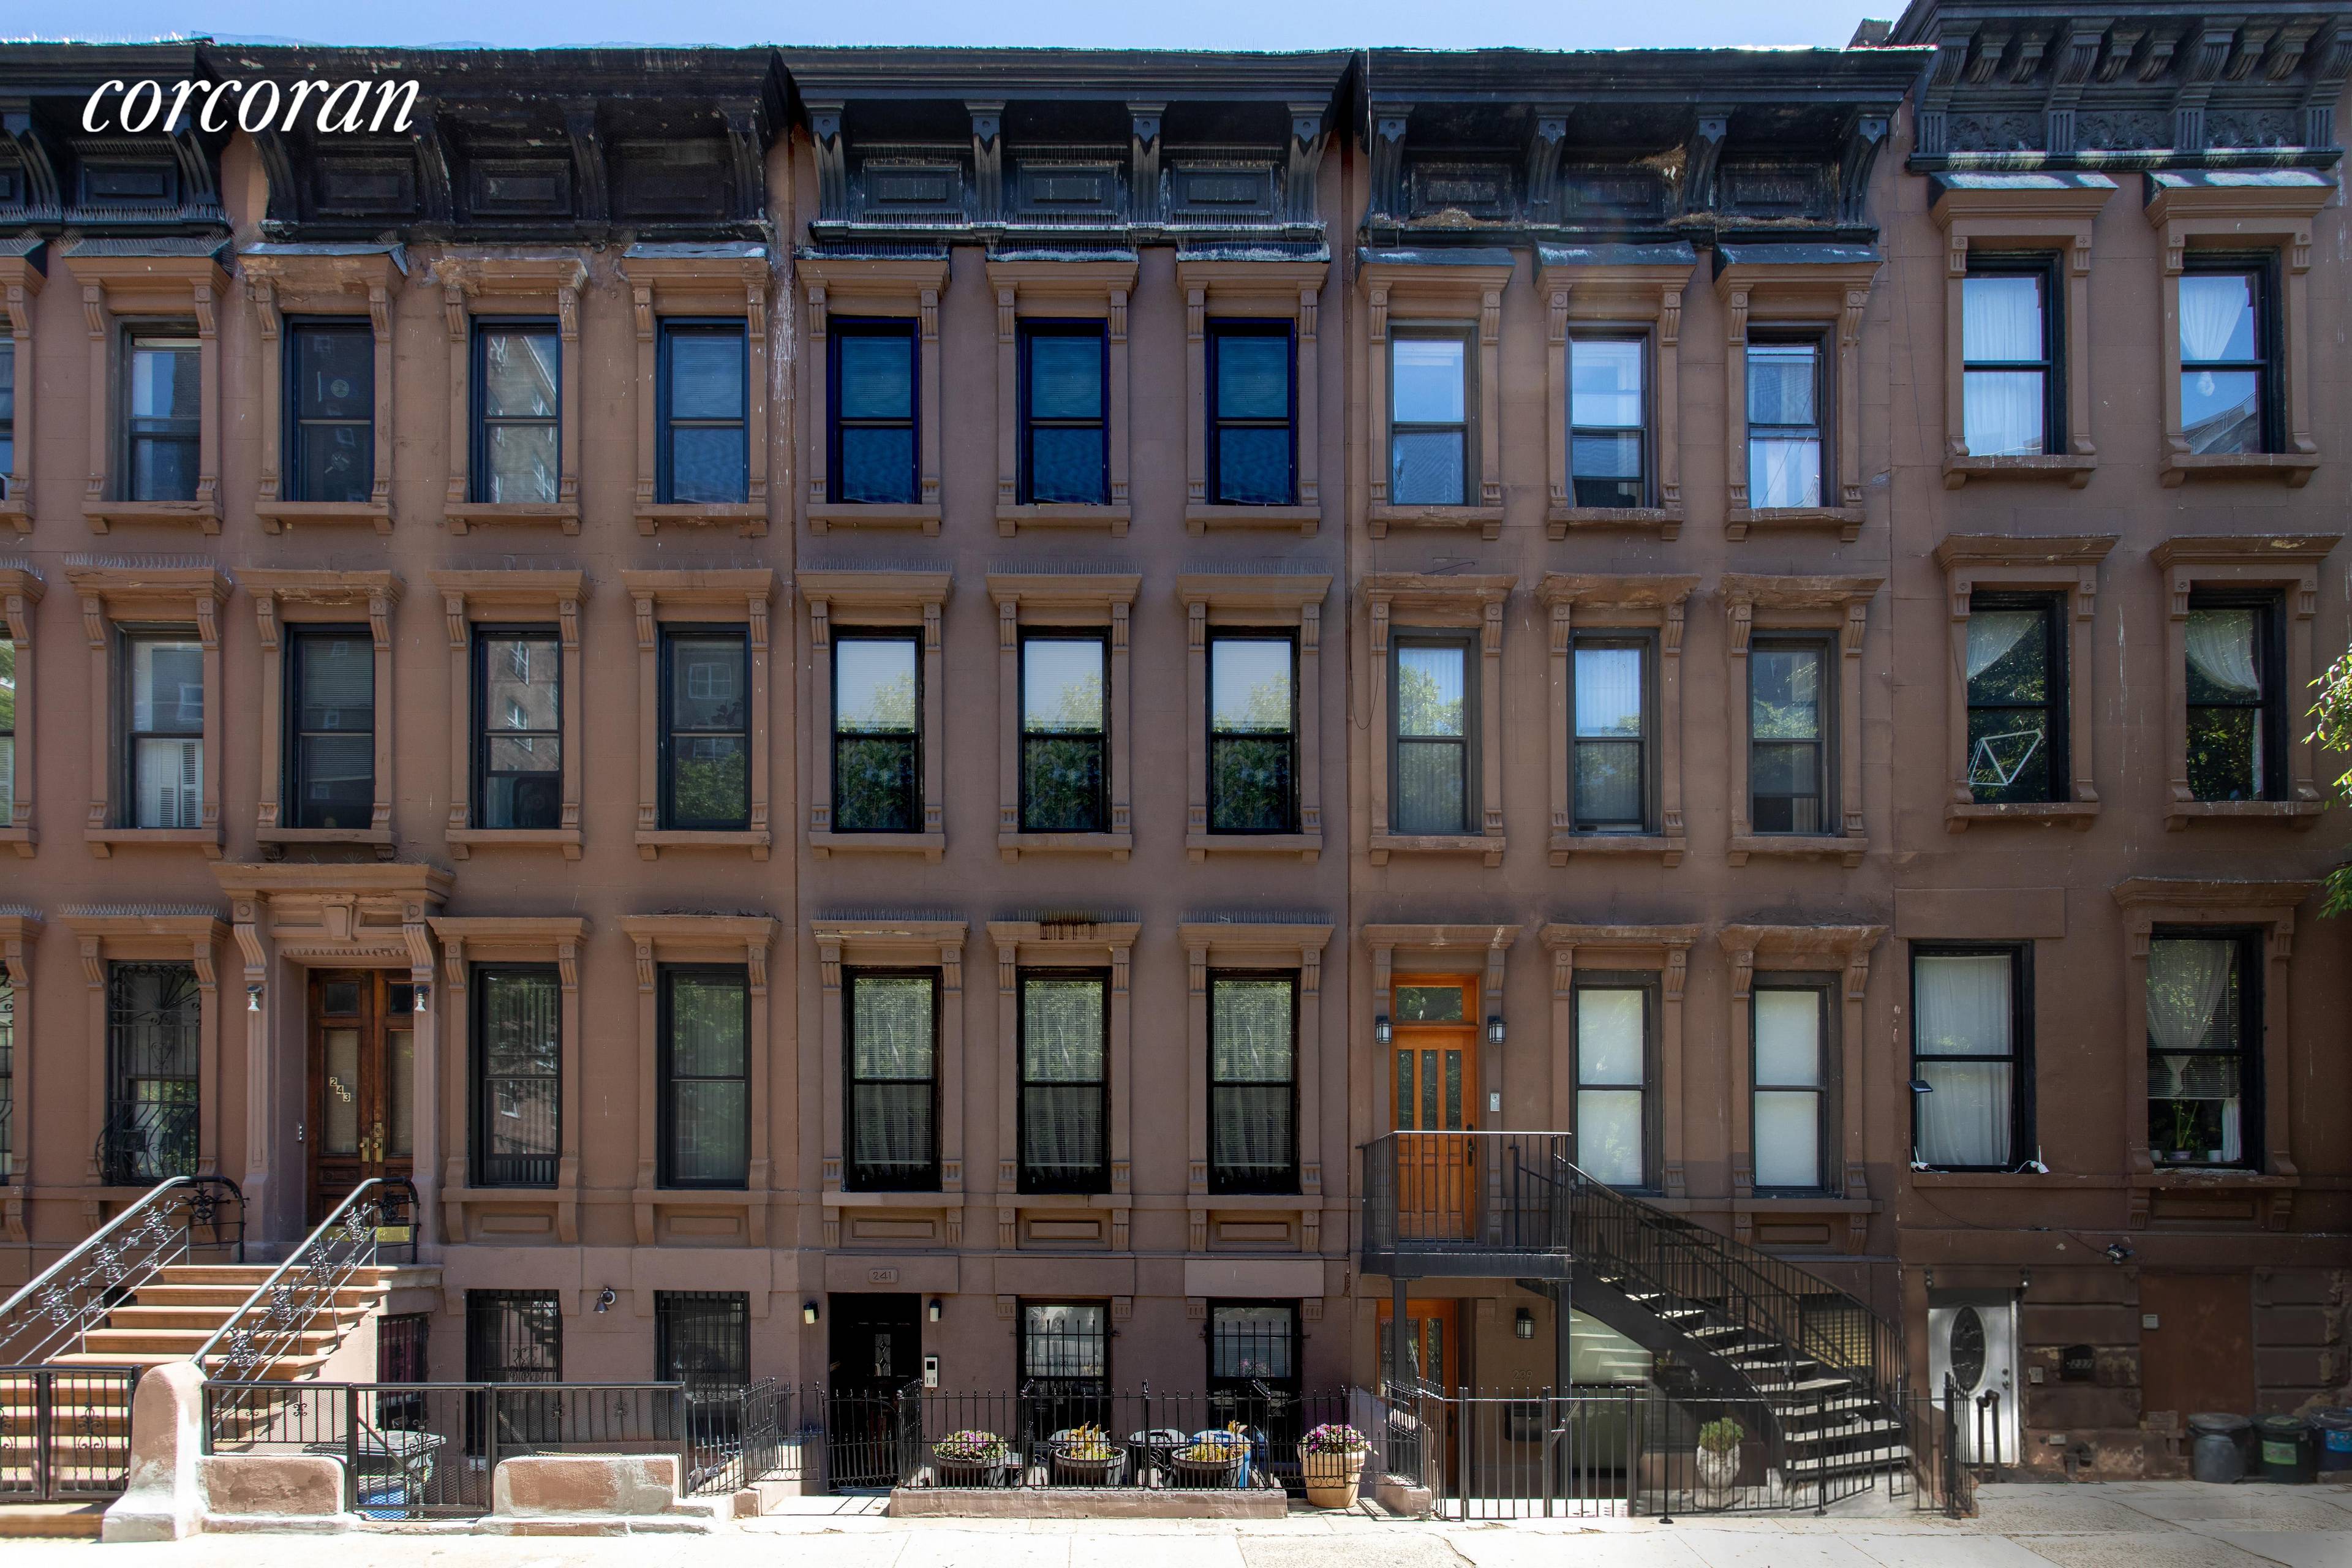 Now itA s a perfect time to purchase a Multifamily Brownstone in Central Harlem.